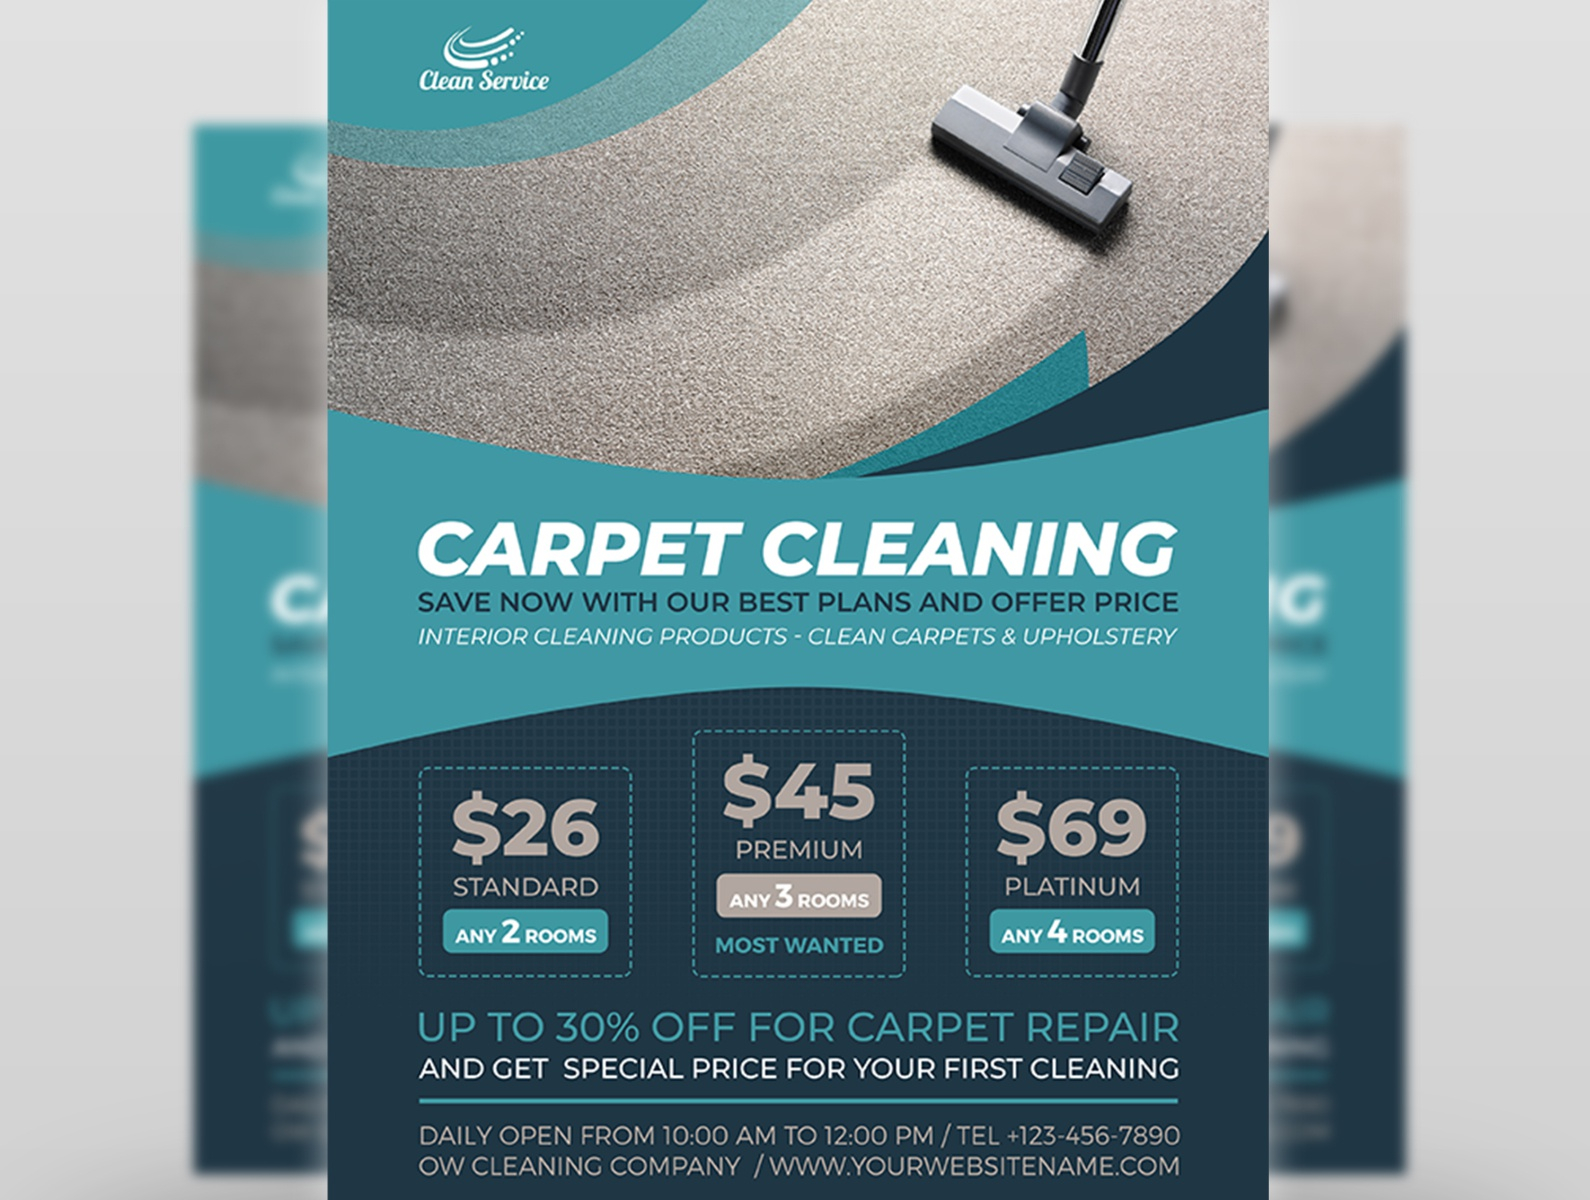 Carpet Cleaning Services Flyer Template By OWPictures On Dribbble For Window Cleaning Flyer Template